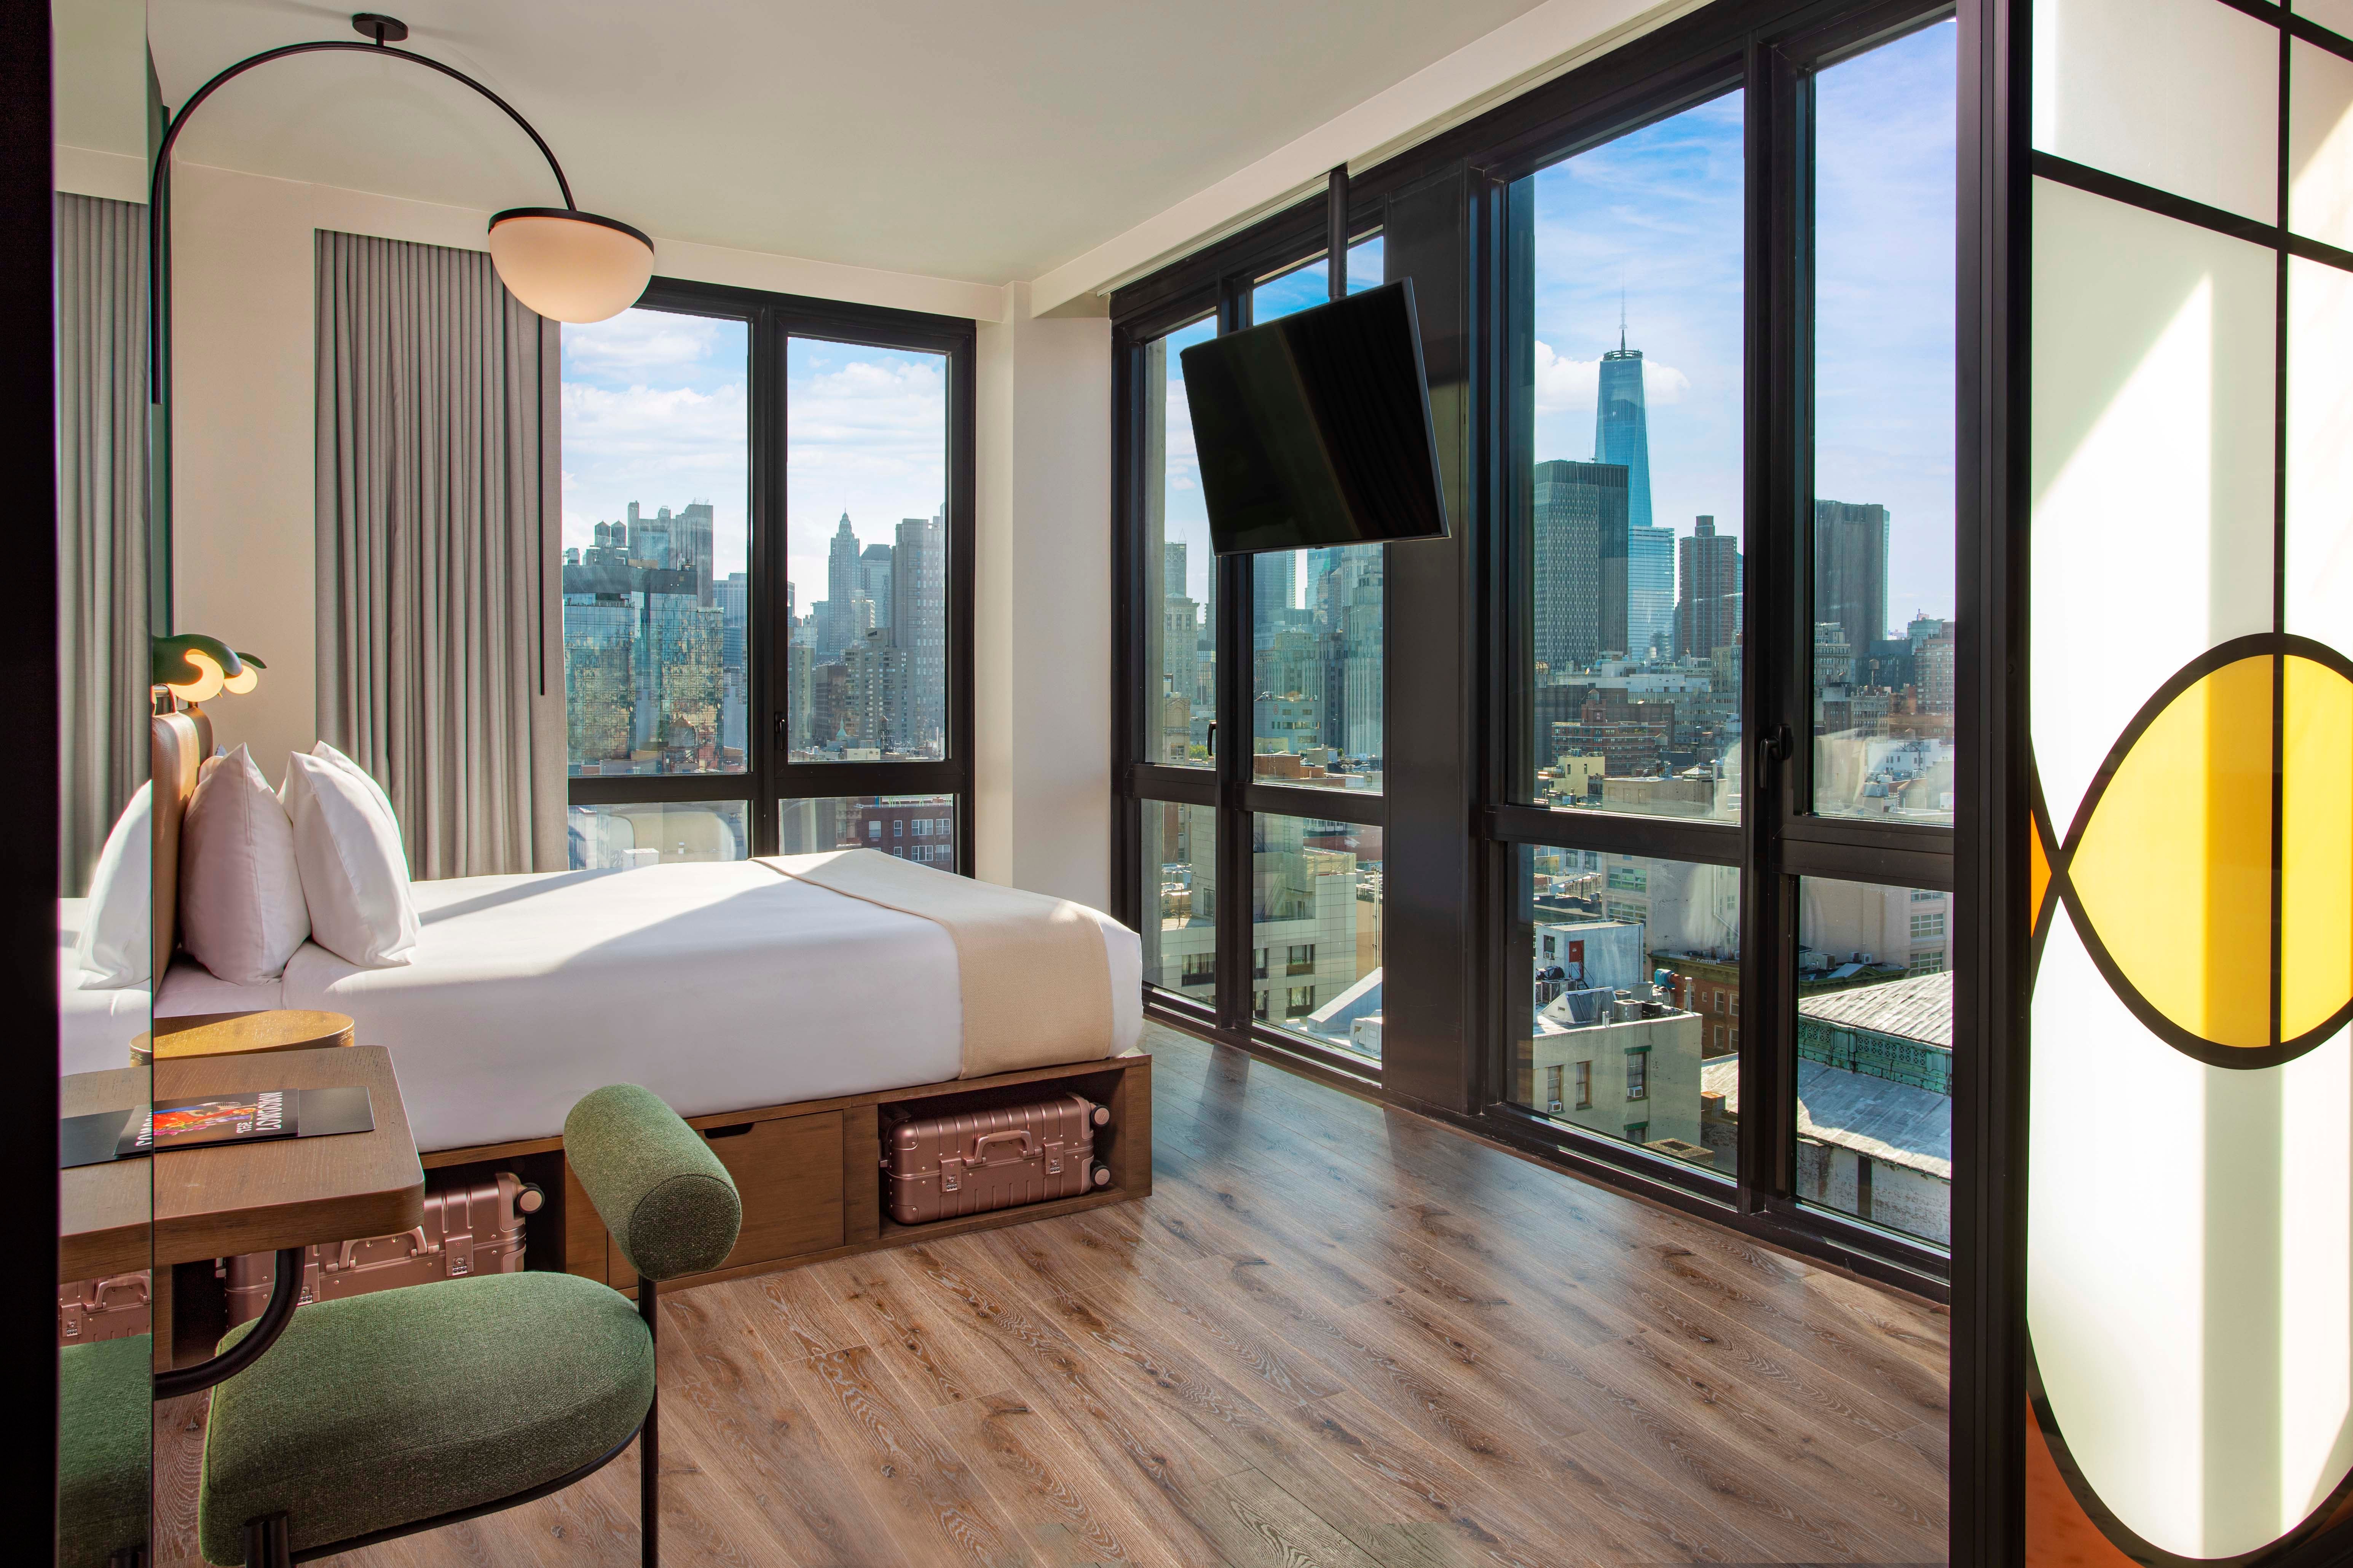 Moxy Lower East Side offers affordable lodgings